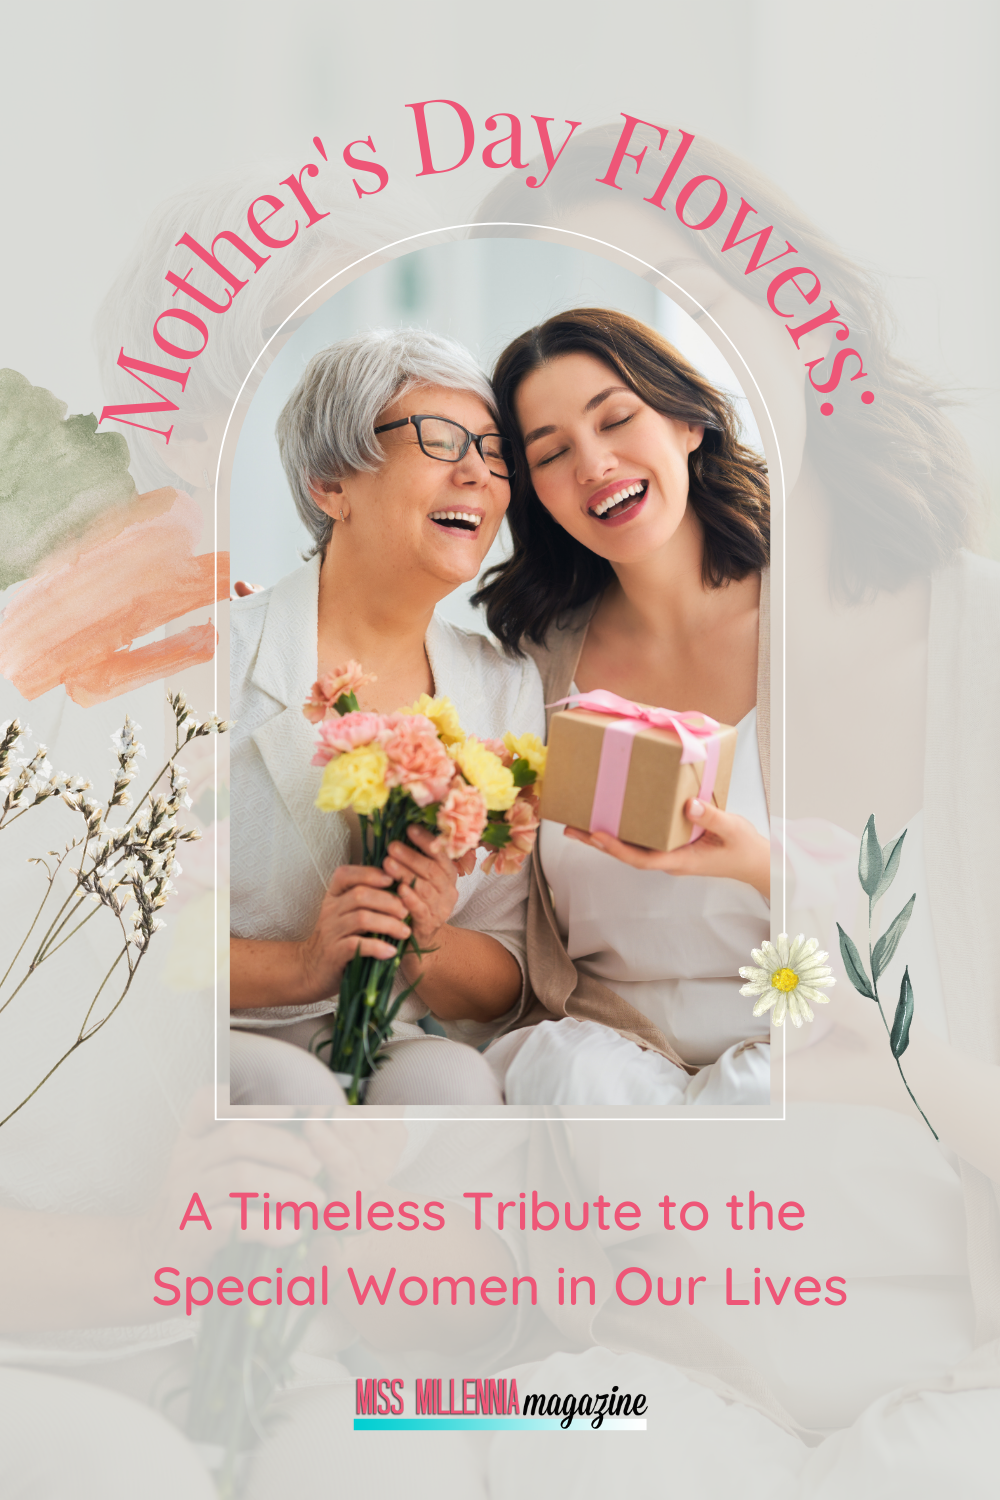 Mother’s Day Flowers: A Timeless Tribute to the Special Women in Our Lives